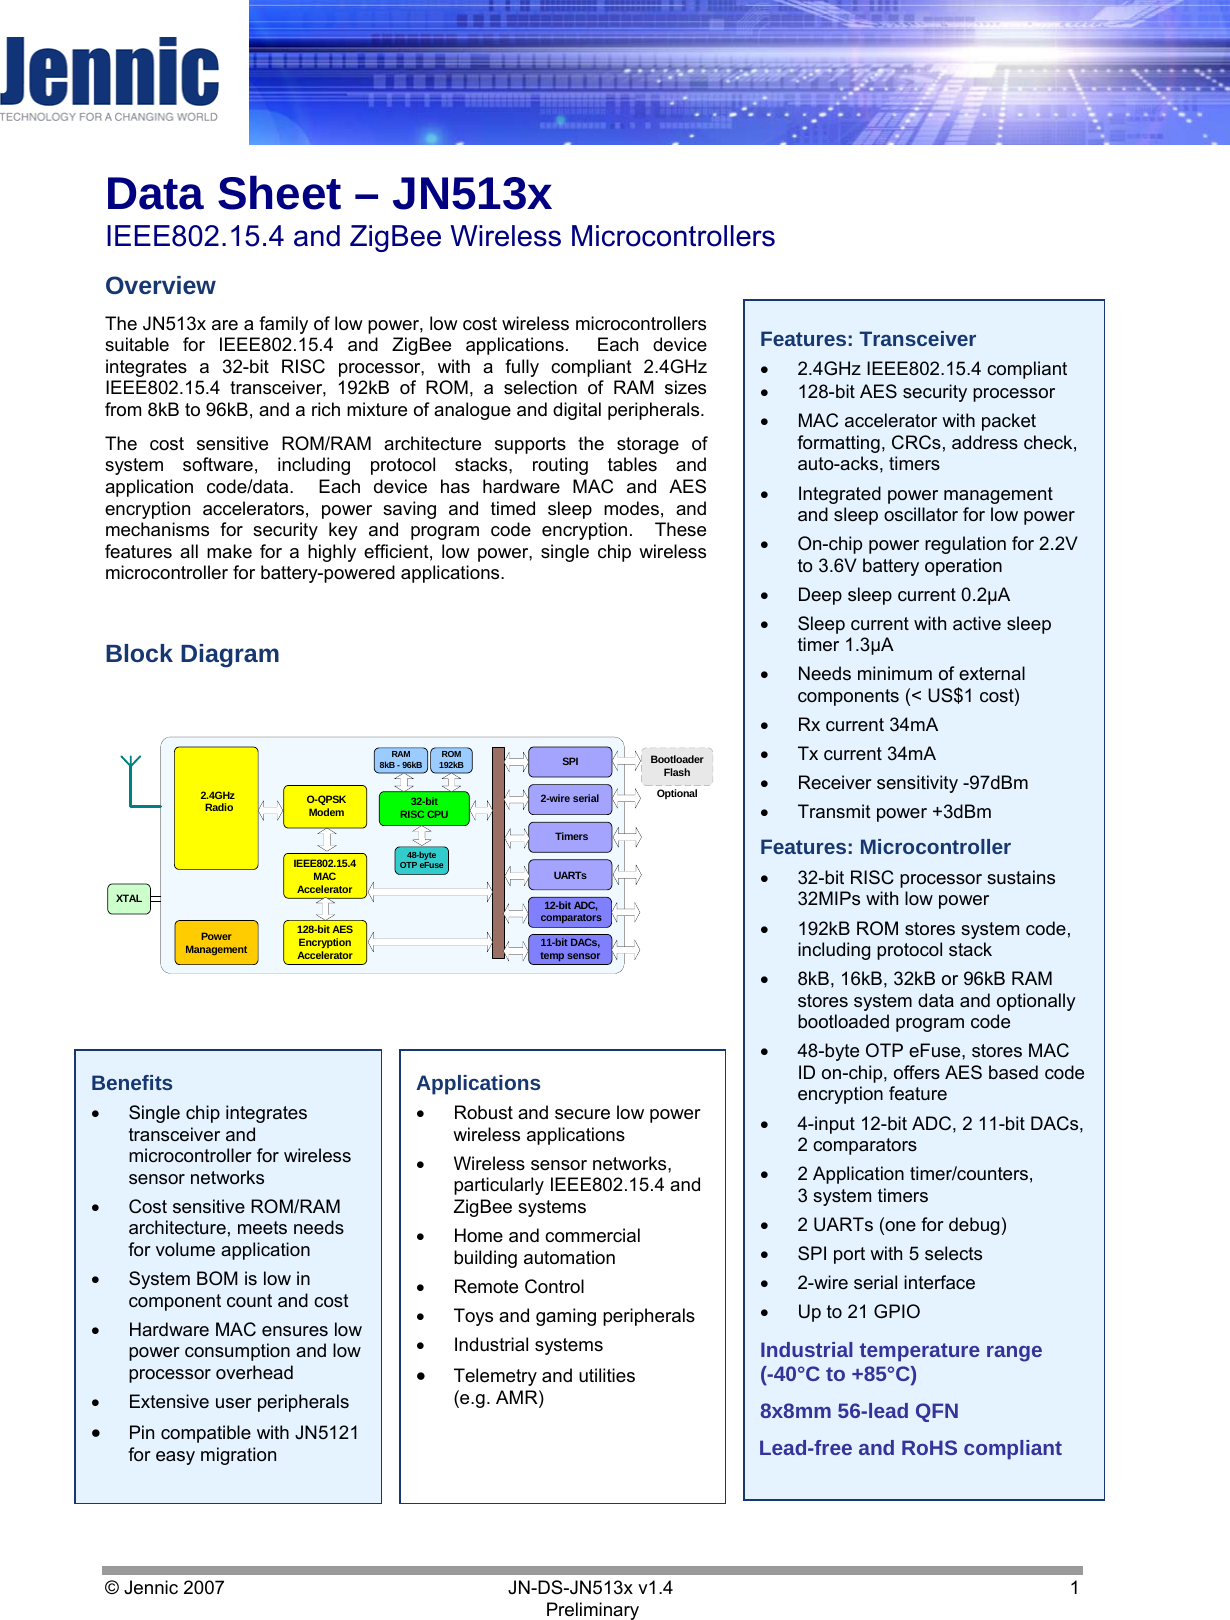     Data Sheet – JN513x IEEE802.15.4 and ZigBee Wireless Microcontrollers © Jennic 2007        JN-DS-JN513x v1.4  1 Preliminary Features: Transceiver •  2.4GHz IEEE802.15.4 compliant •  128-bit AES security processor  •  MAC accelerator with packet formatting, CRCs, address check, auto-acks, timers •  Integrated power management and sleep oscillator for low power •  On-chip power regulation for 2.2V to 3.6V battery operation •  Deep sleep current 0.2µA •  Sleep current with active sleep timer 1.3µA •  Needs minimum of external components (&lt; US$1 cost) •  Rx current 34mA •  Tx current 34mA •  Receiver sensitivity -97dBm •  Transmit power +3dBm Features: Microcontroller •  32-bit RISC processor sustains 32MIPs with low power  •  192kB ROM stores system code, including protocol stack •  8kB, 16kB, 32kB or 96kB RAM stores system data and optionally bootloaded program code •  48-byte OTP eFuse, stores MAC ID on-chip, offers AES based code encryption feature •  4-input 12-bit ADC, 2 11-bit DACs, 2 comparators •  2 Application timer/counters,  3 system timers •  2 UARTs (one for debug) •  SPI port with 5 selects •  2-wire serial interface •  Up to 21 GPIO  Industrial temperature range (-40°C to +85°C) 8x8mm 56-lead QFN Lead-free and RoHS compliant Overview The JN513x are a family of low power, low cost wireless microcontrollers suitable for IEEE802.15.4 and ZigBee applications.  Each device integrates a 32-bit RISC processor, with a fully compliant 2.4GHz IEEE802.15.4 transceiver, 192kB of ROM, a selection of RAM sizes from 8kB to 96kB, and a rich mixture of analogue and digital peripherals.  The cost sensitive ROM/RAM architecture supports the storage of system software, including protocol stacks, routing tables and application code/data.  Each device has hardware MAC and AES encryption accelerators, power saving and timed sleep modes, and mechanisms for security key and program code encryption.  These features all make for a highly efficient, low power, single chip wireless microcontroller for battery-powered applications.  Block Diagram Benefits •  Single chip integrates transceiver and microcontroller for wireless sensor networks •  Cost sensitive ROM/RAM architecture, meets needs for volume application •  System BOM is low in component count and cost •  Hardware MAC ensures low power consumption and low processor overhead •  Extensive user peripherals •  Pin compatible with JN5121 for easy migration Applications •  Robust and secure low power wireless applications •  Wireless sensor networks, particularly IEEE802.15.4 and ZigBee systems •  Home and commercial building automation •  Remote Control •  Toys and gaming peripherals •  Industrial systems •  Telemetry and utilities (e.g. AMR) Optional32-bitRISC CPUTimersUARTs12-bit ADC,comparators11-bit DACs,temp sensor2-wire serialSPIRAM8kB - 96kB128-bit AESEncryptionAccelerator2.4GHz RadioROM192kBPowerManagementXTALO-QPSKModemIEEE802.15.4MACAcceleratorBootloaderFlash48-byteOTP eFuse